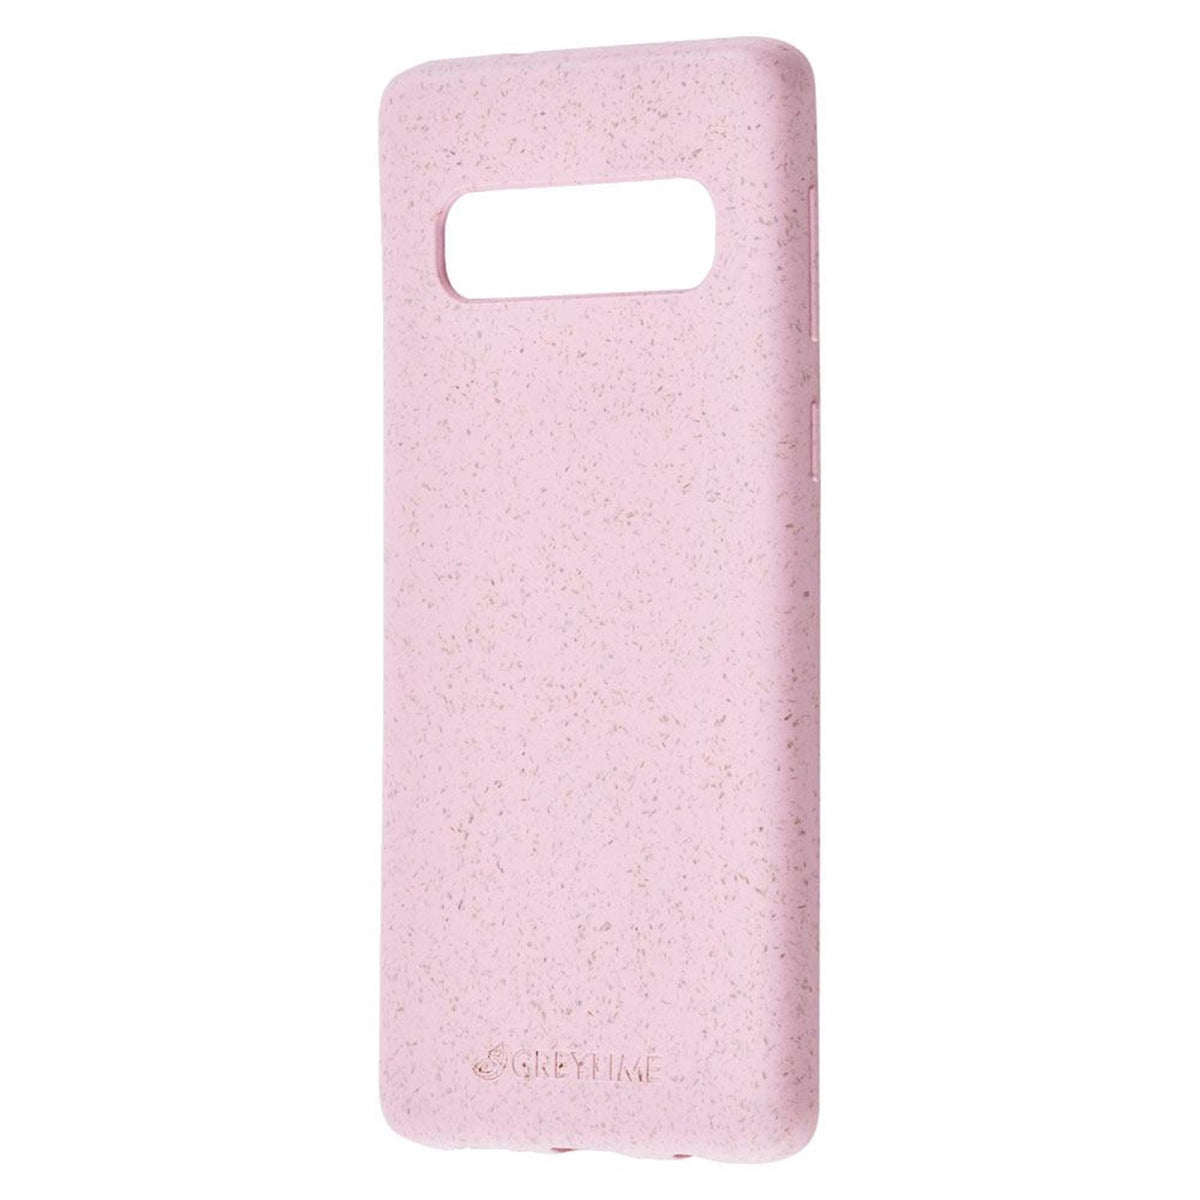 GreyLime-Samsung-Galaxy-S10-Plus-biodegradable-cover-Pink-COSAM10P05-V2.jpg